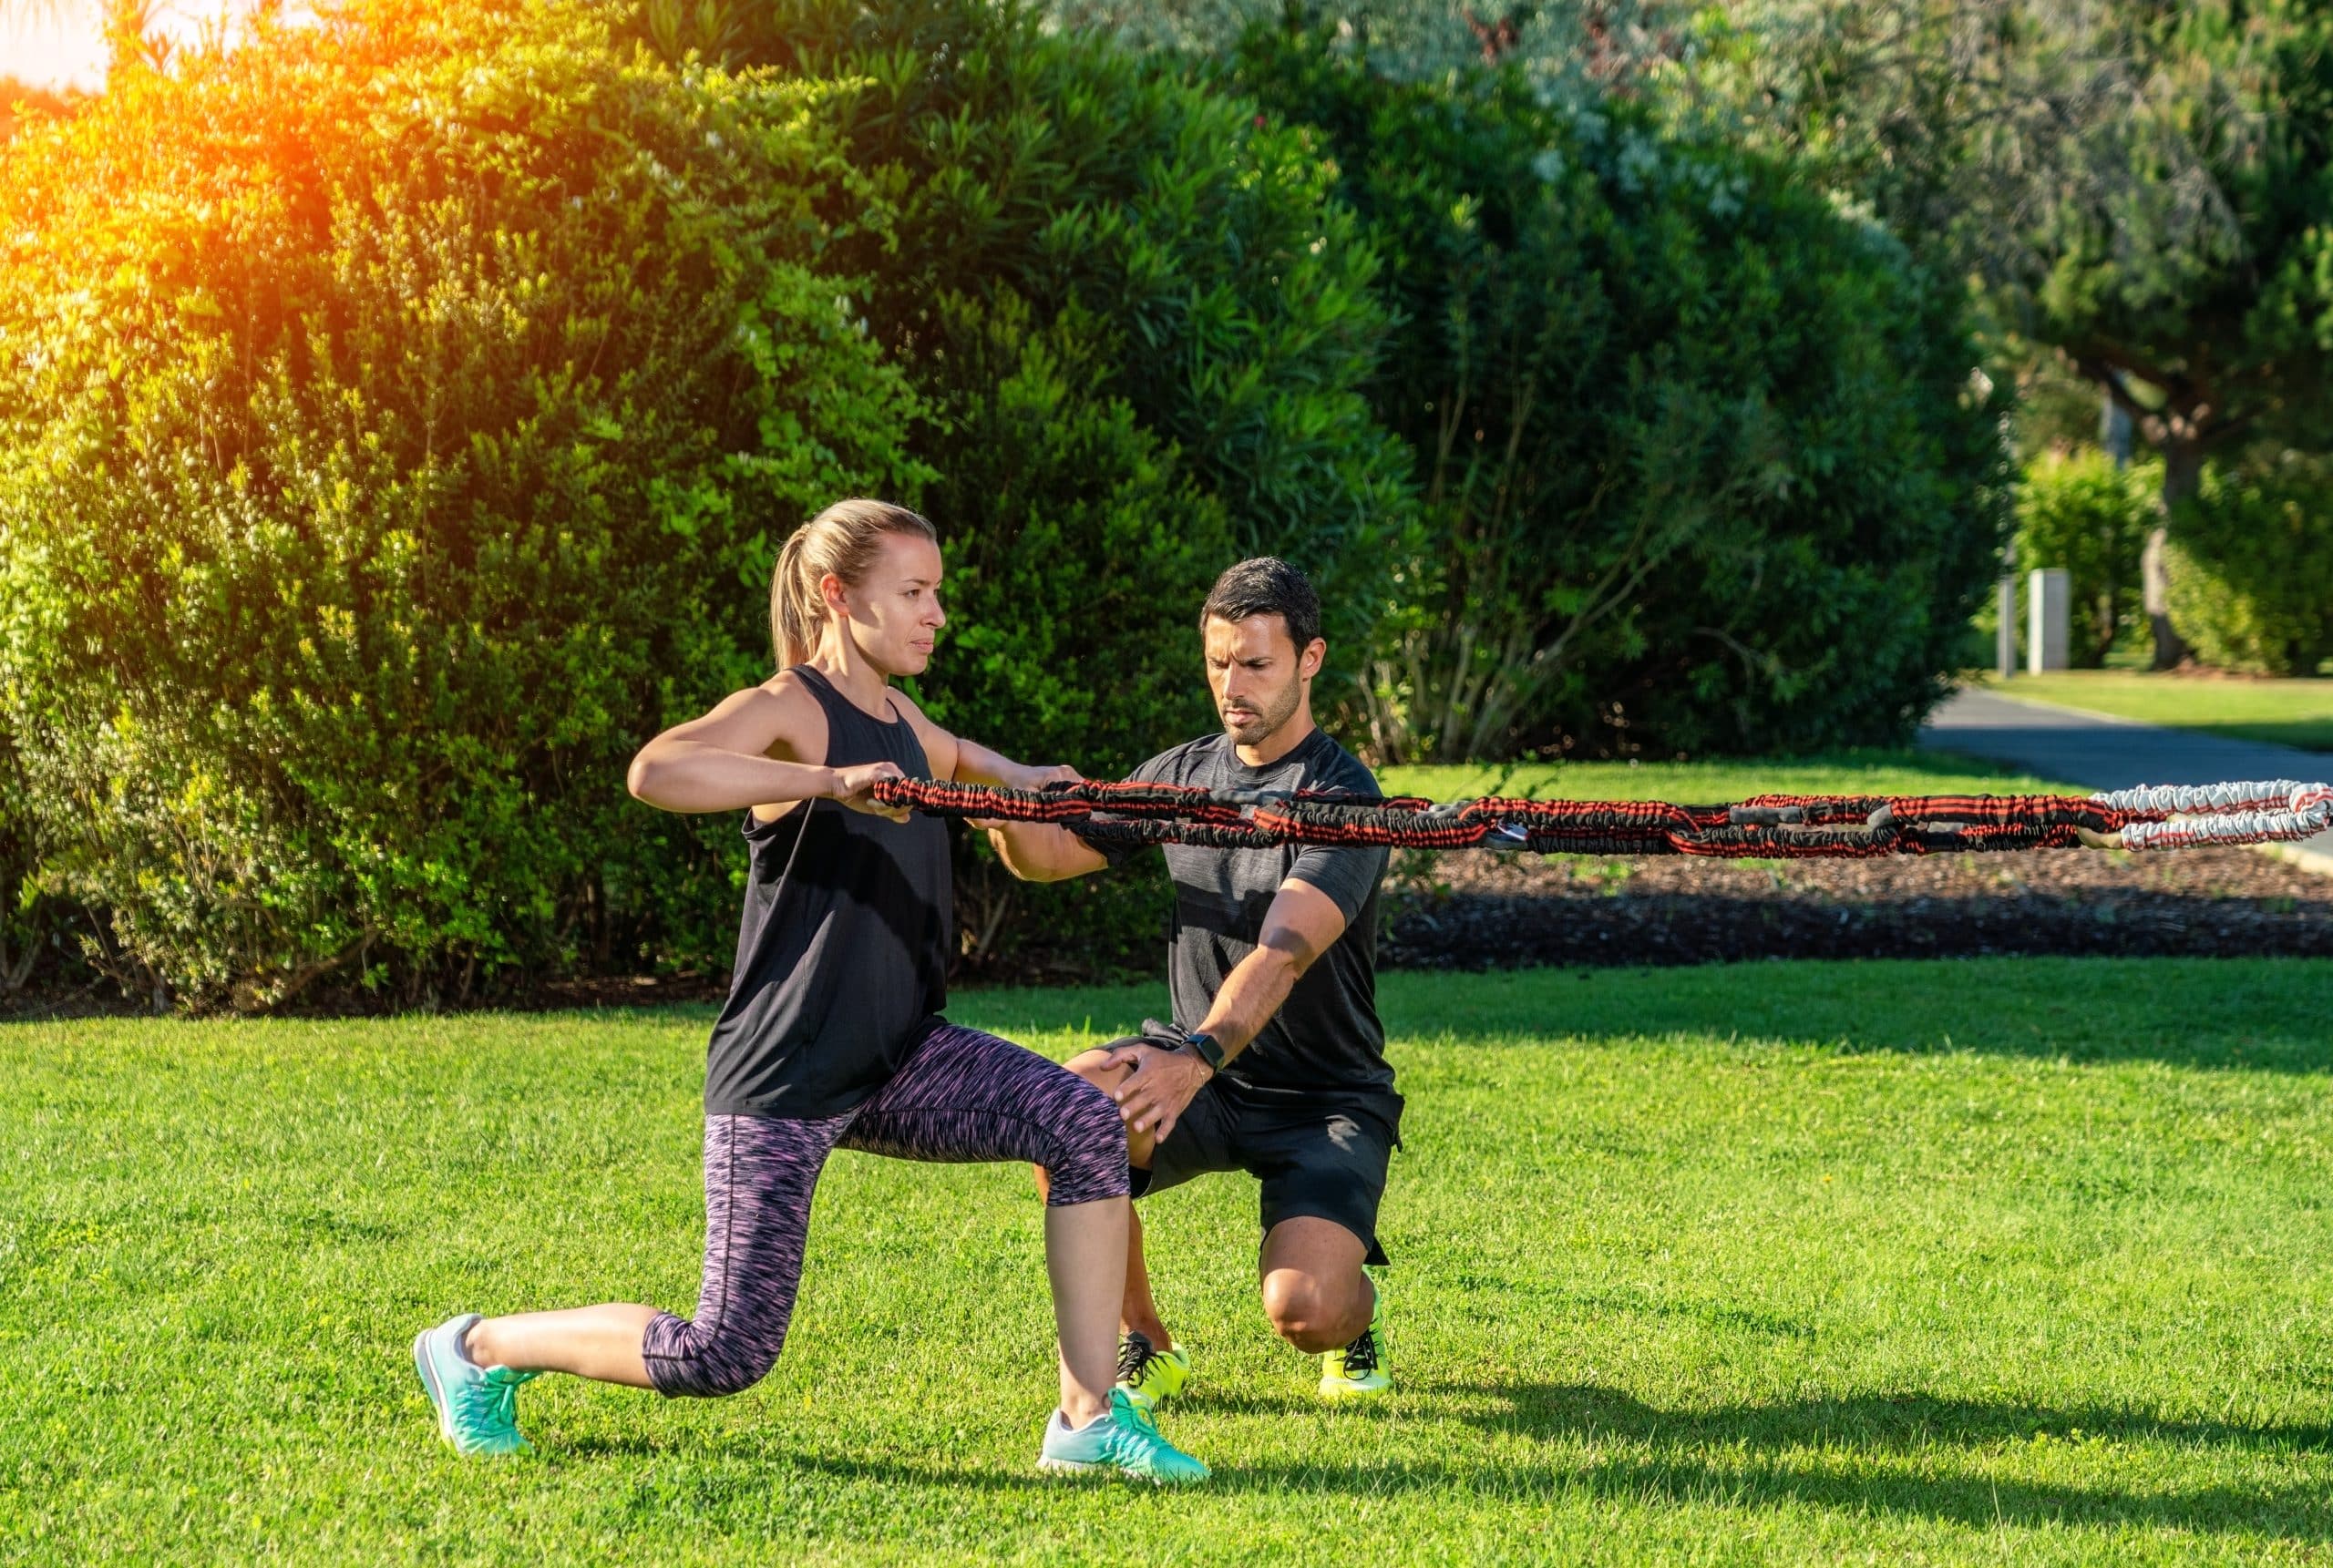 Run your own fitness business? Our rooms to rent Enfield will help. Image shows a personal trainer taking a fitness class with his female client doing lunges with ropes in a park.